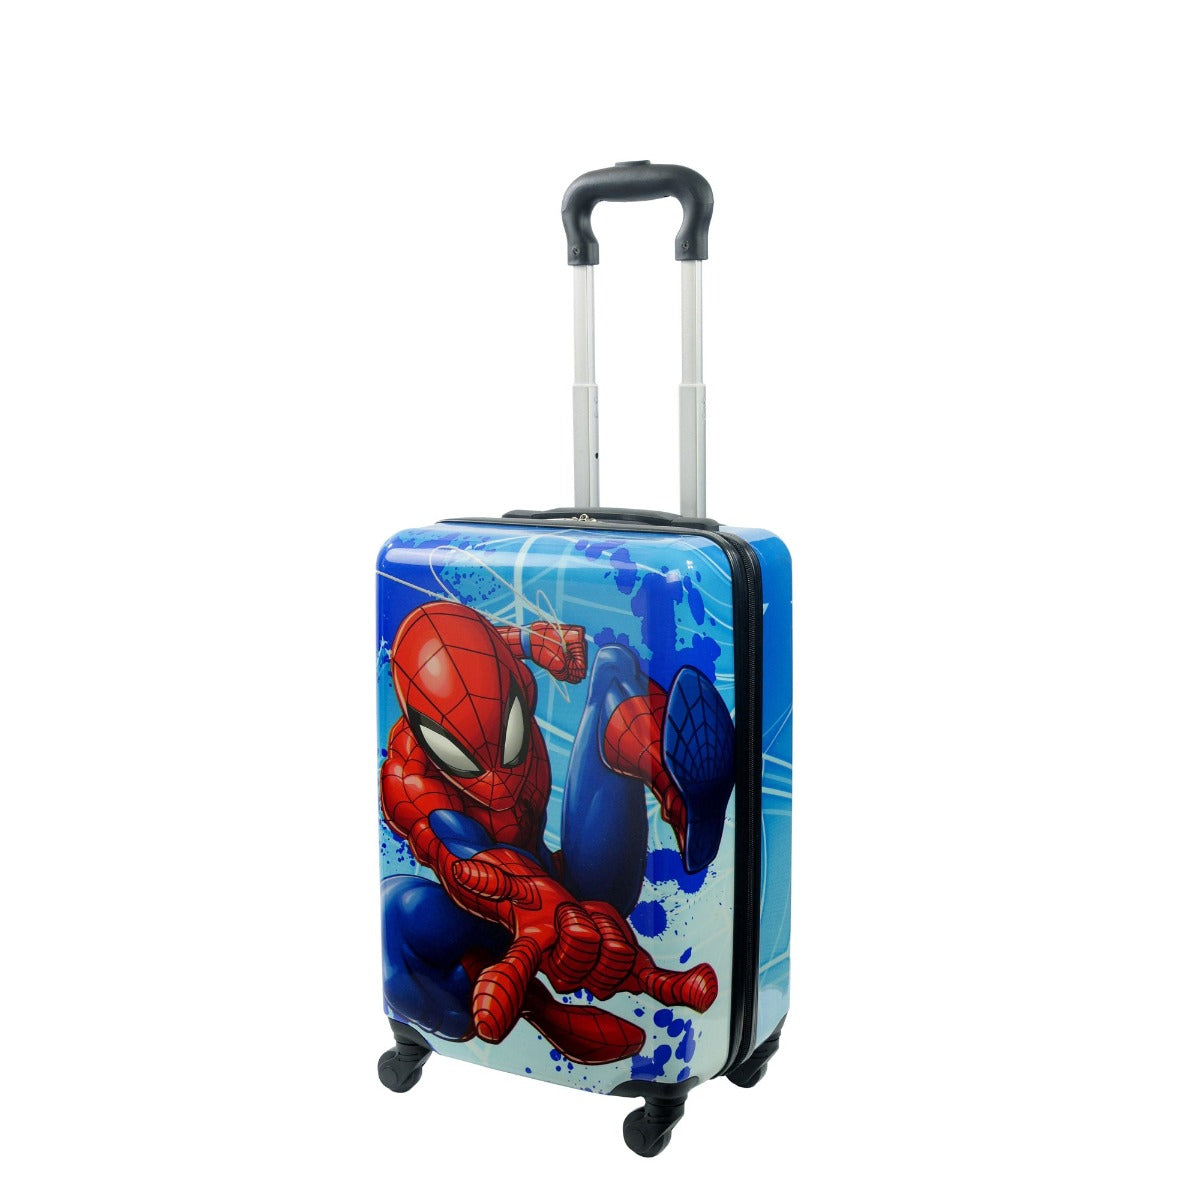 Ful Spiderman kids 21" hardside spinner carry on luggage - best travelling suitcases for kids